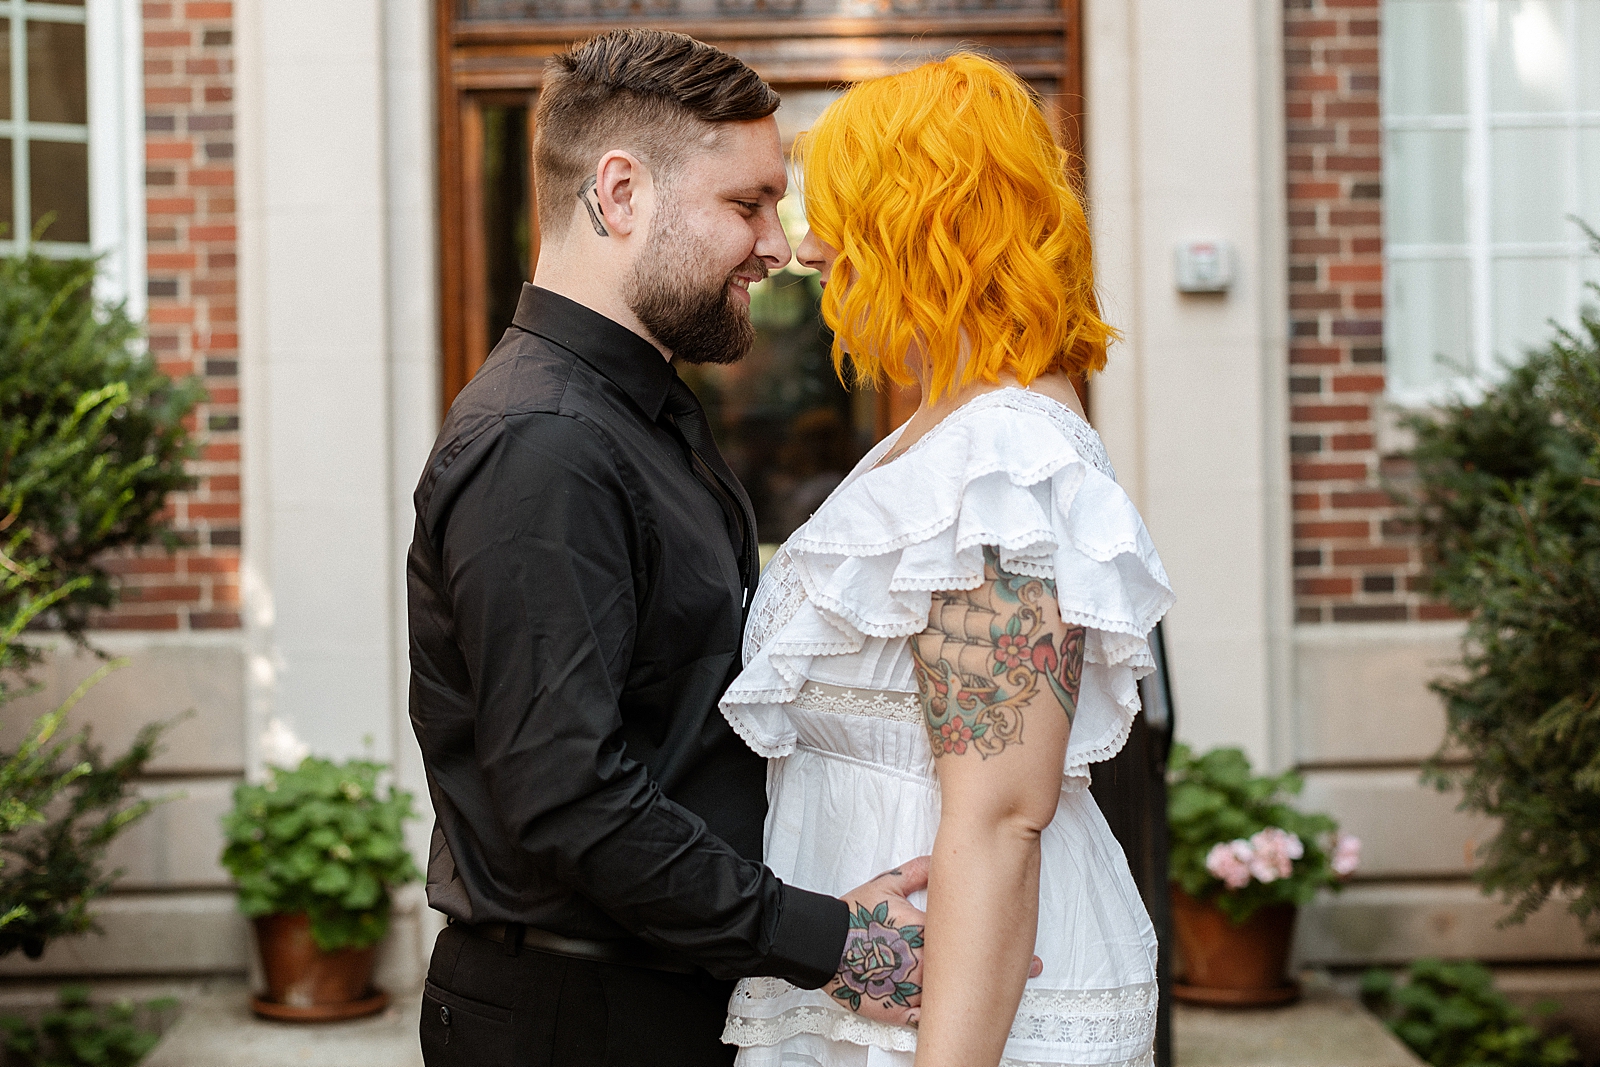 Groom holding Bride close face to face in front of brick building